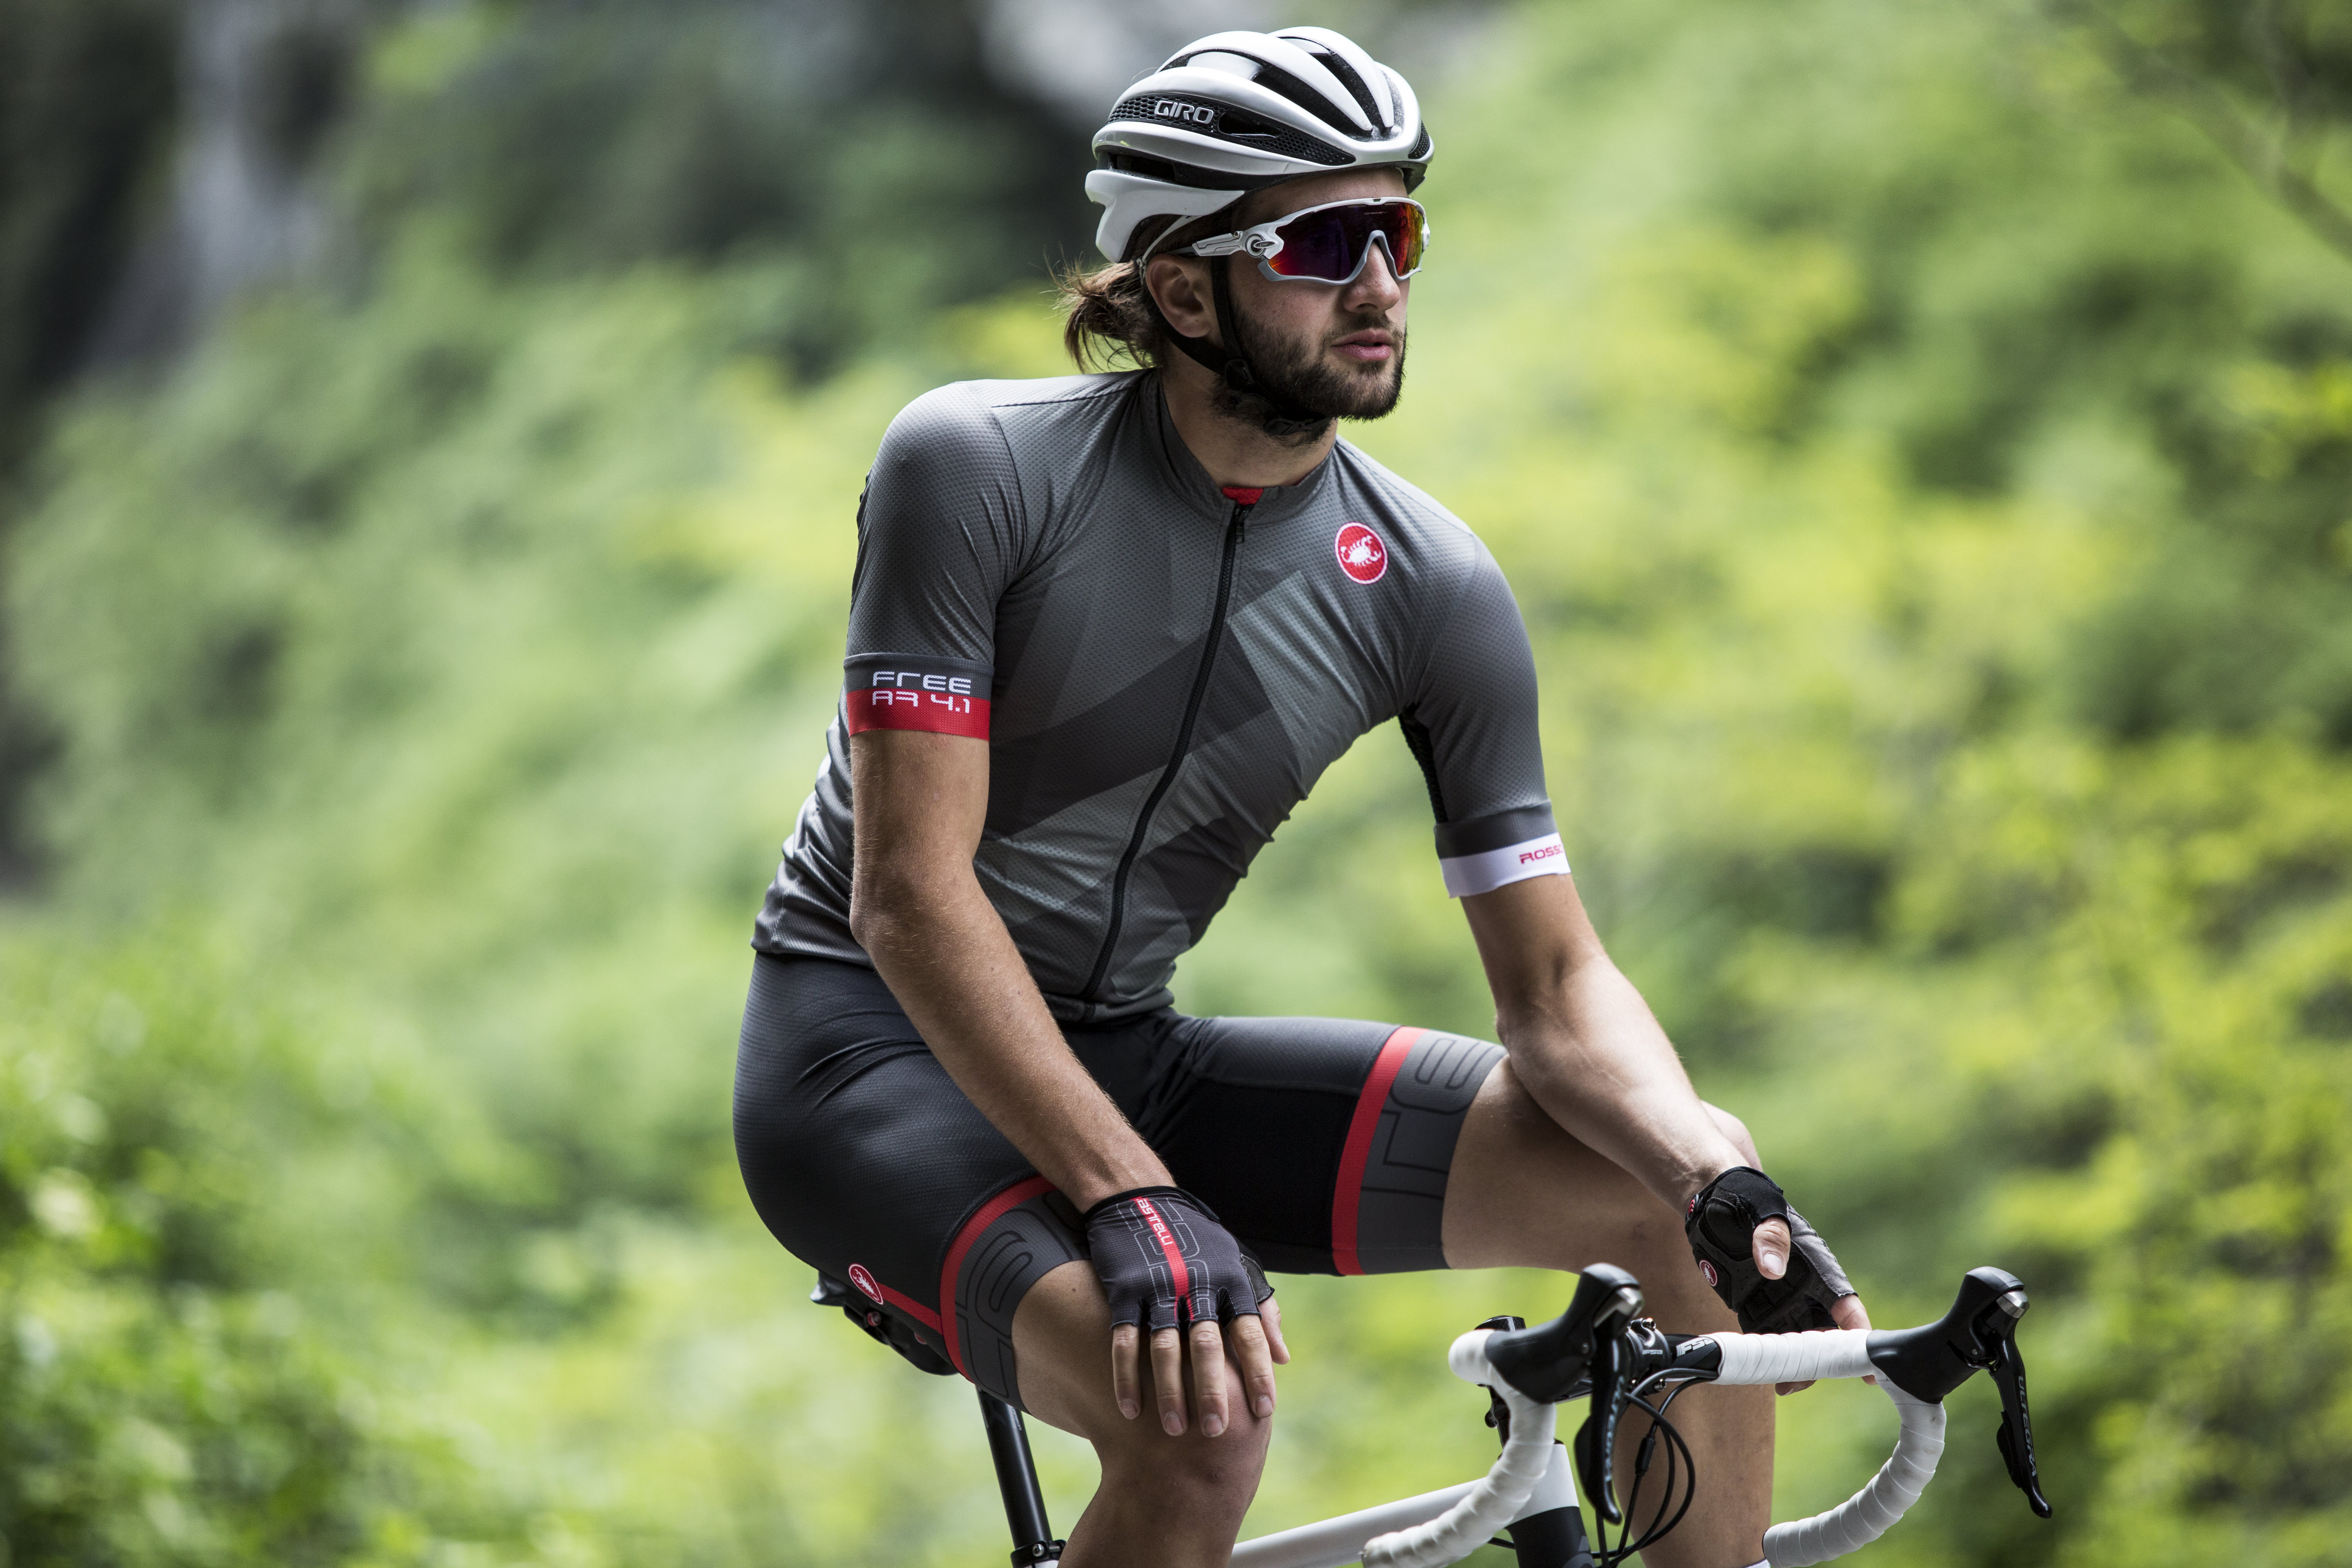 a rider in the Free AR 4.1 jersey from castelli spring summer 2018